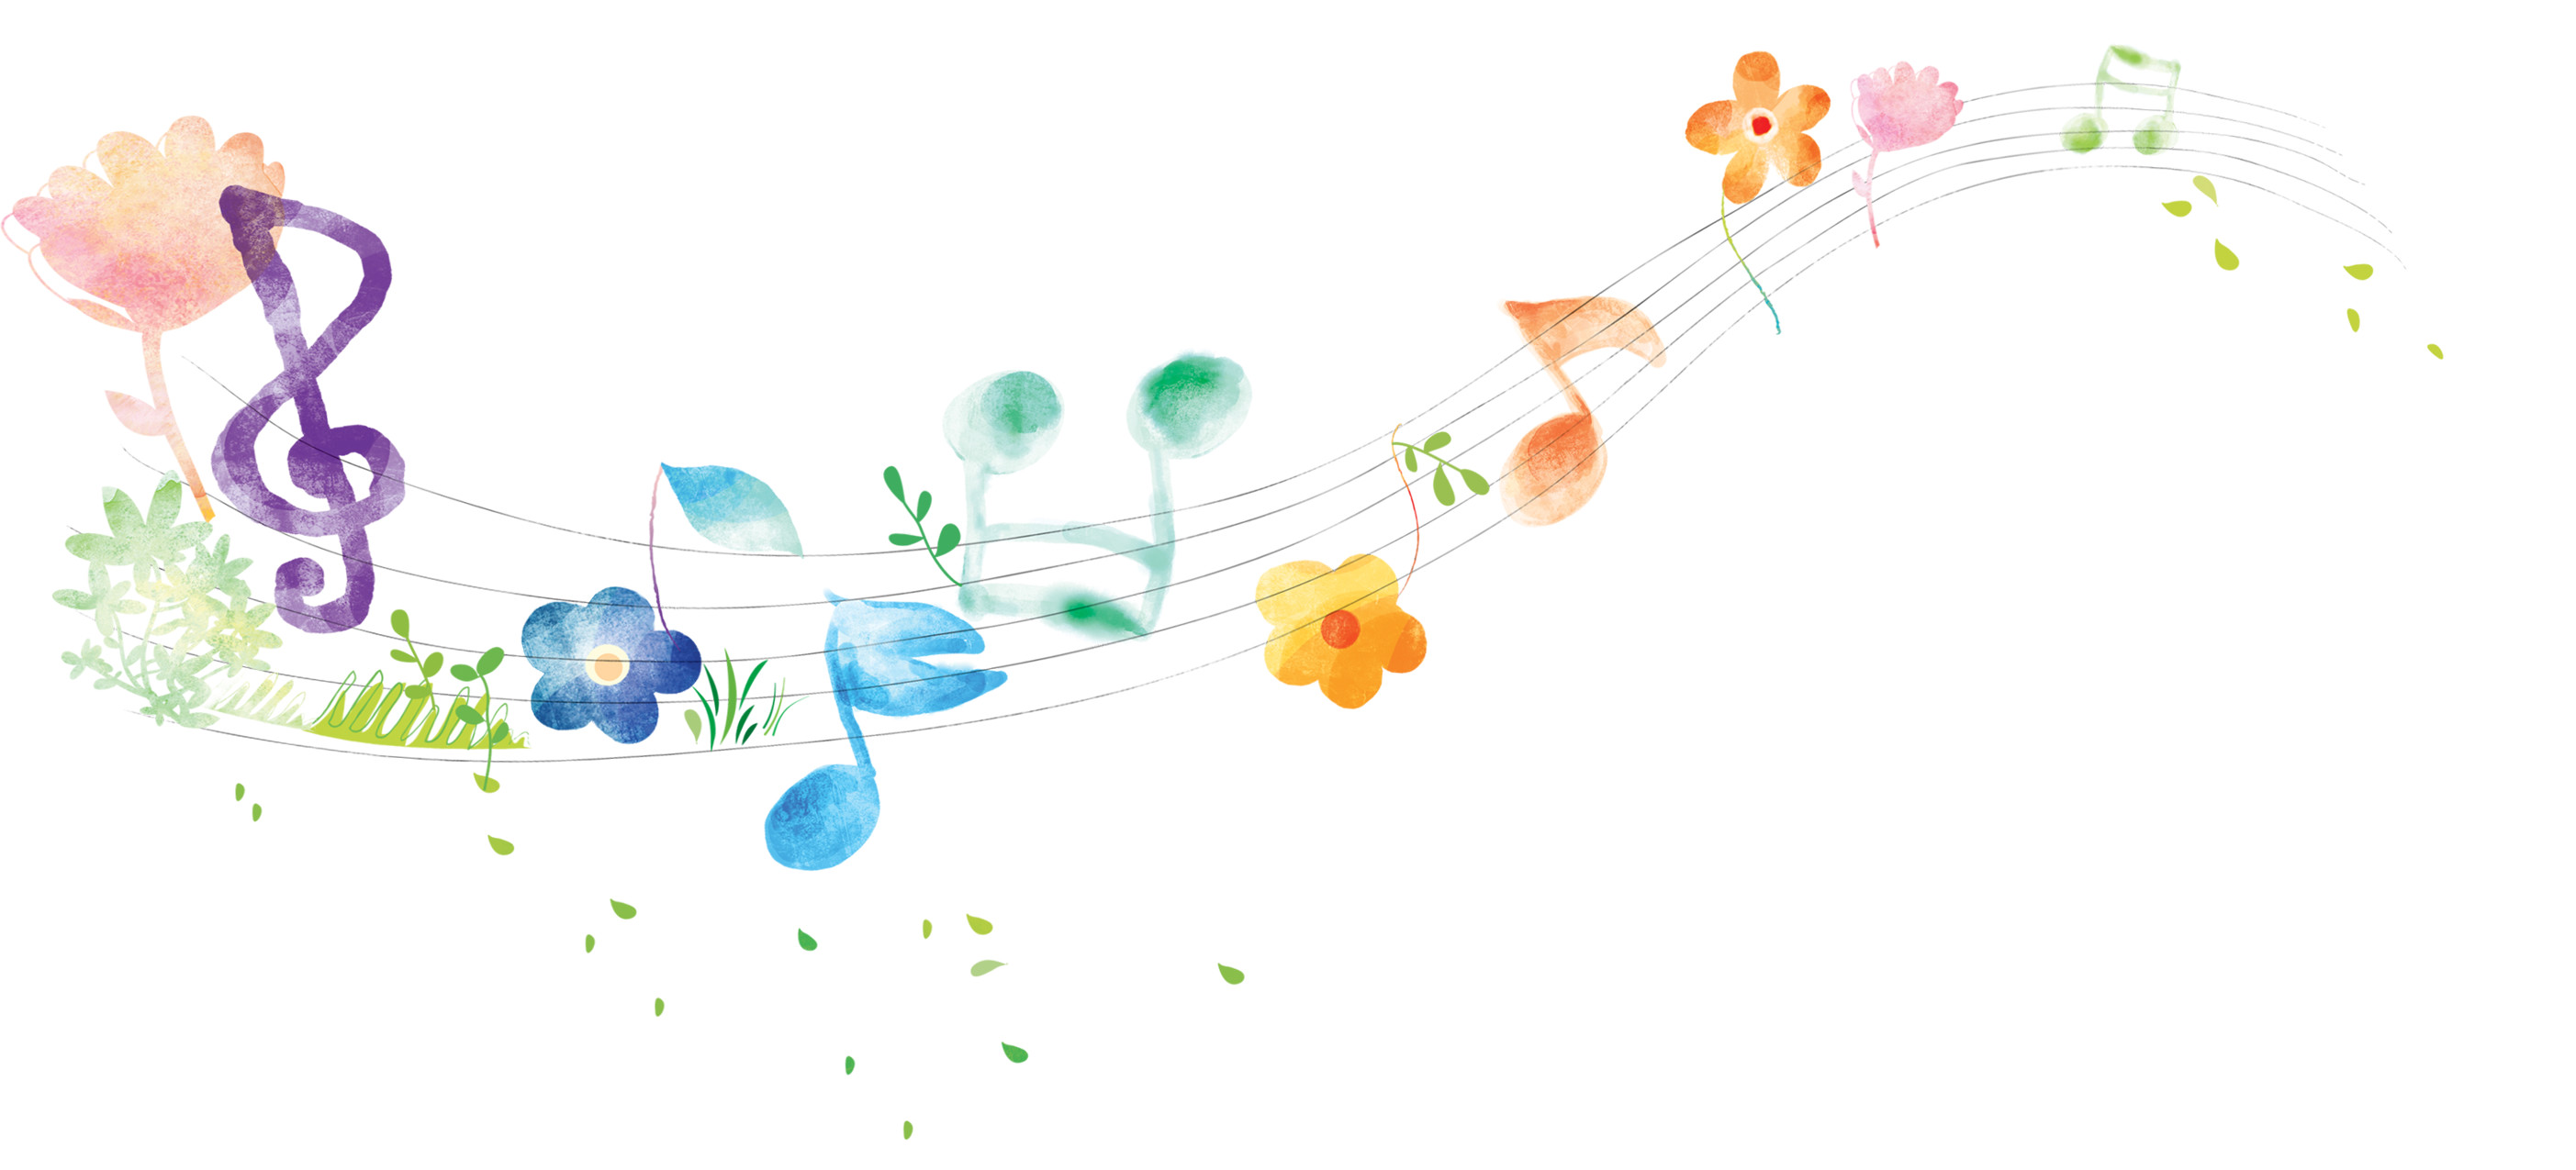 2806x1275 2806 x 1275 25 1 Â· Design google search artsy. Colorful music notes ...